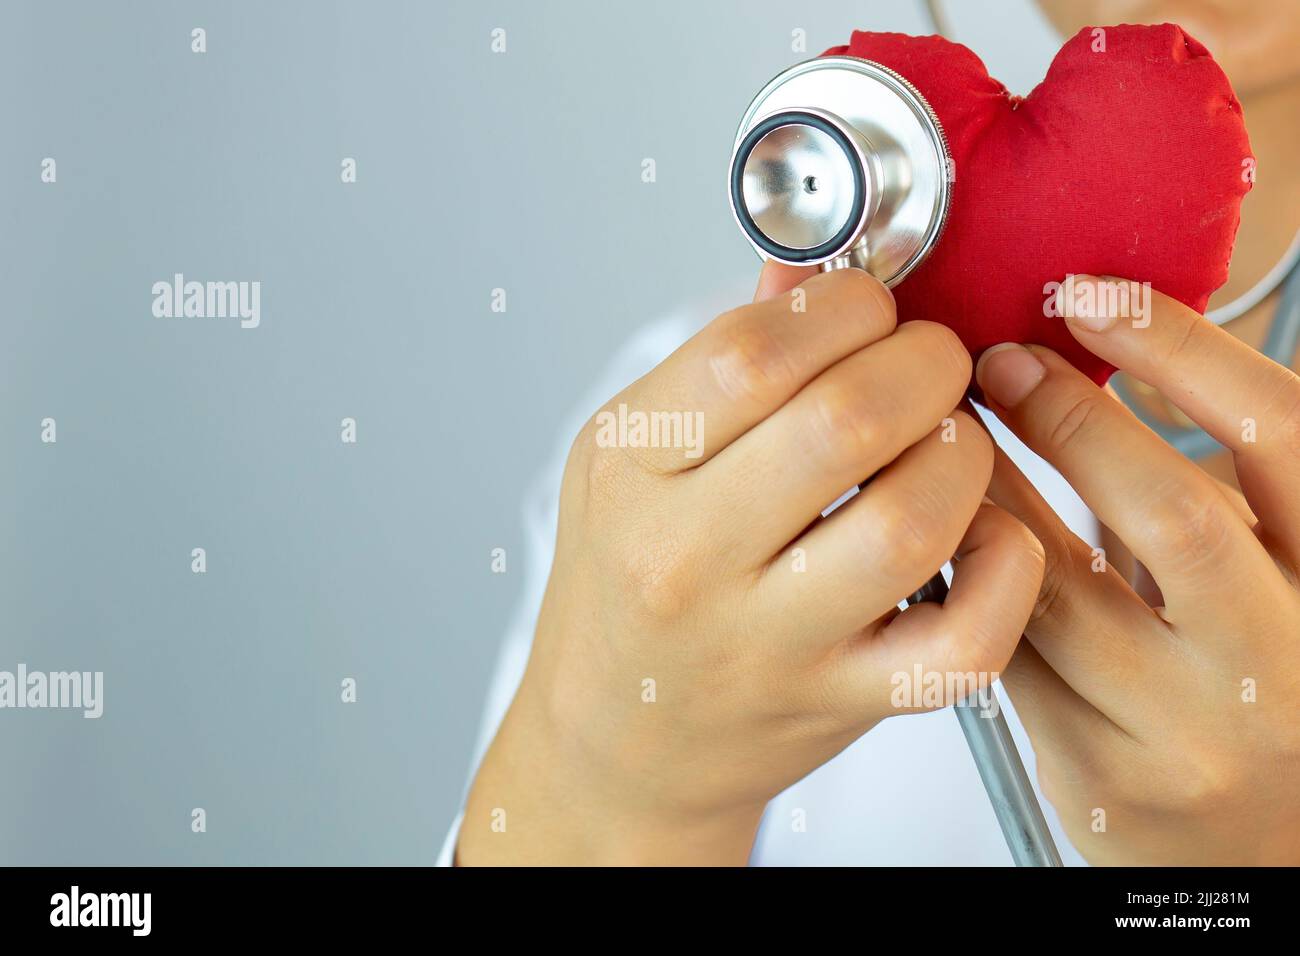 check up on a heart. Concept of health care Stock Photo